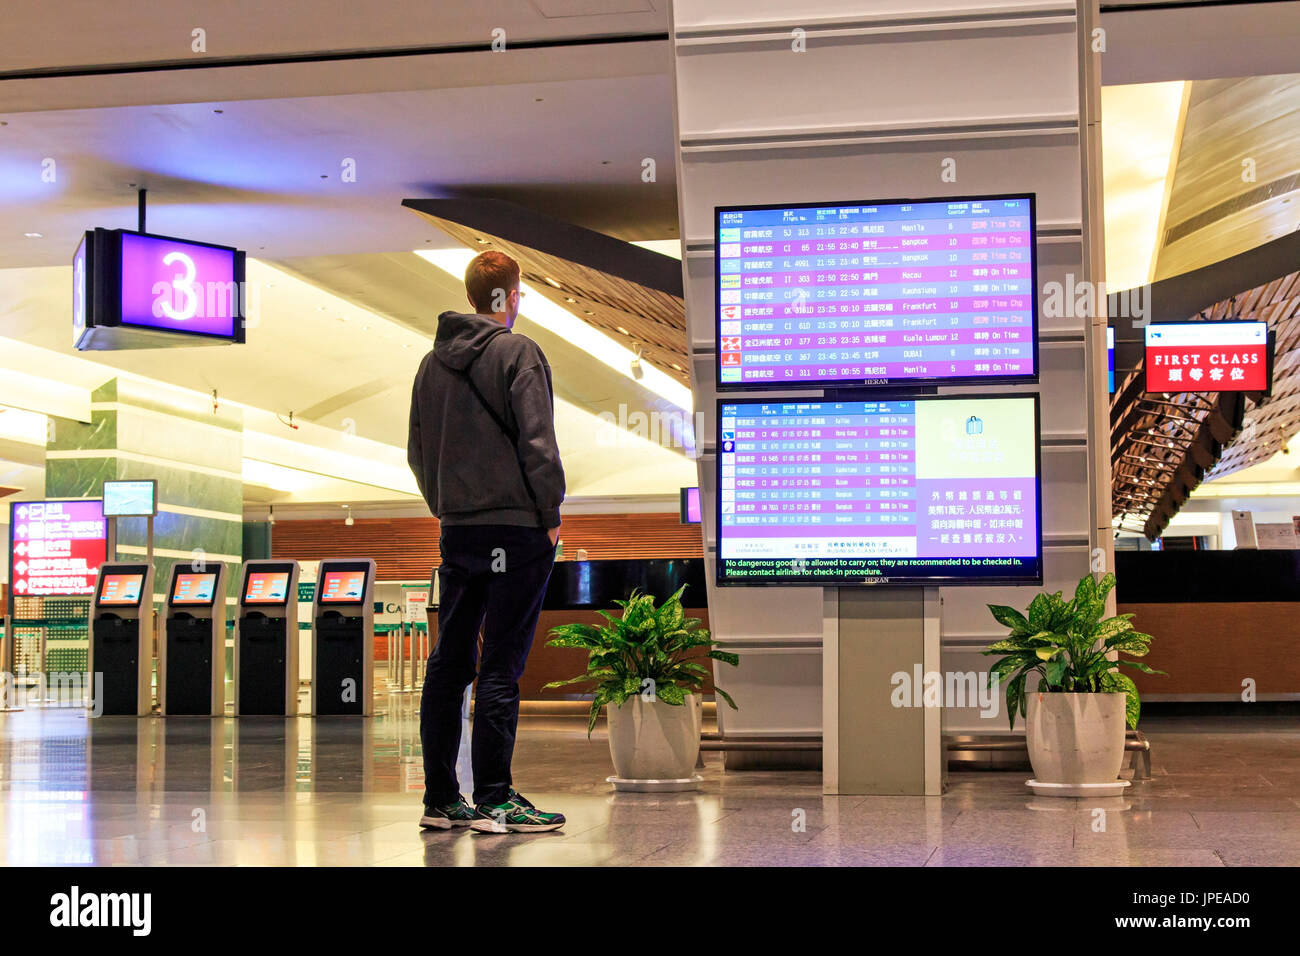 Taipei, Taiwan. Man stading in front of a Flight Information Board inside the Taiwan Taoyuan International Airport, the busiest airport in the country and the main international hub for China Airlines and EVA Air. Stock Photo